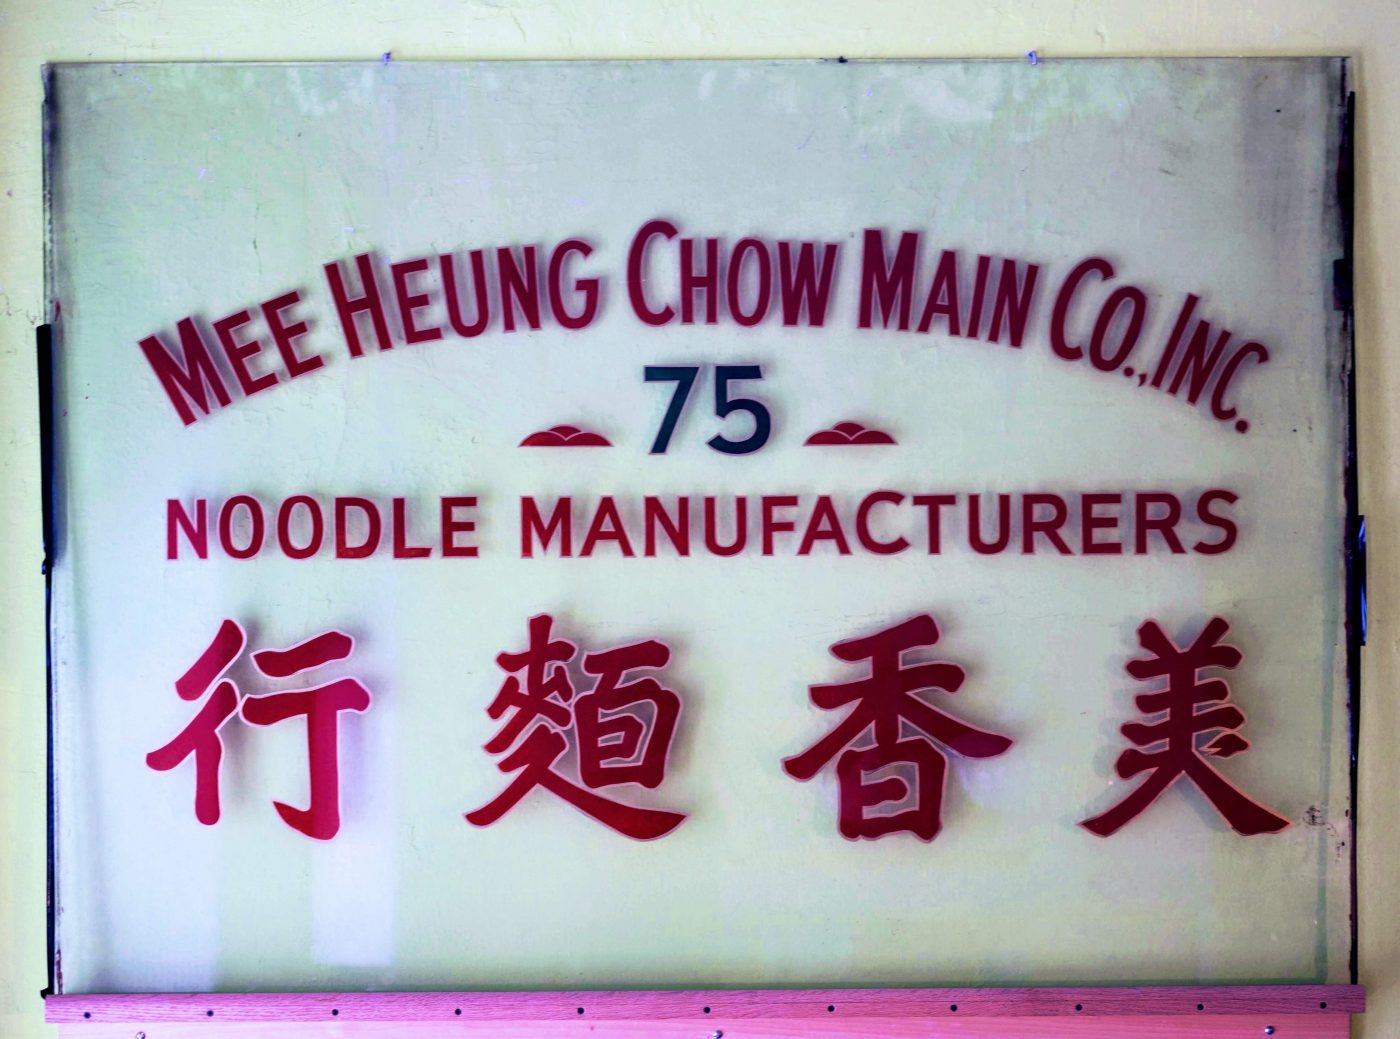 13 September 2019 Posted.
Sign of the Mee Heung Chow Main Co., Museum of Chinese in America (MOCA) Collection.
美香面行招牌，美国华人博物馆（MOCA）馆藏